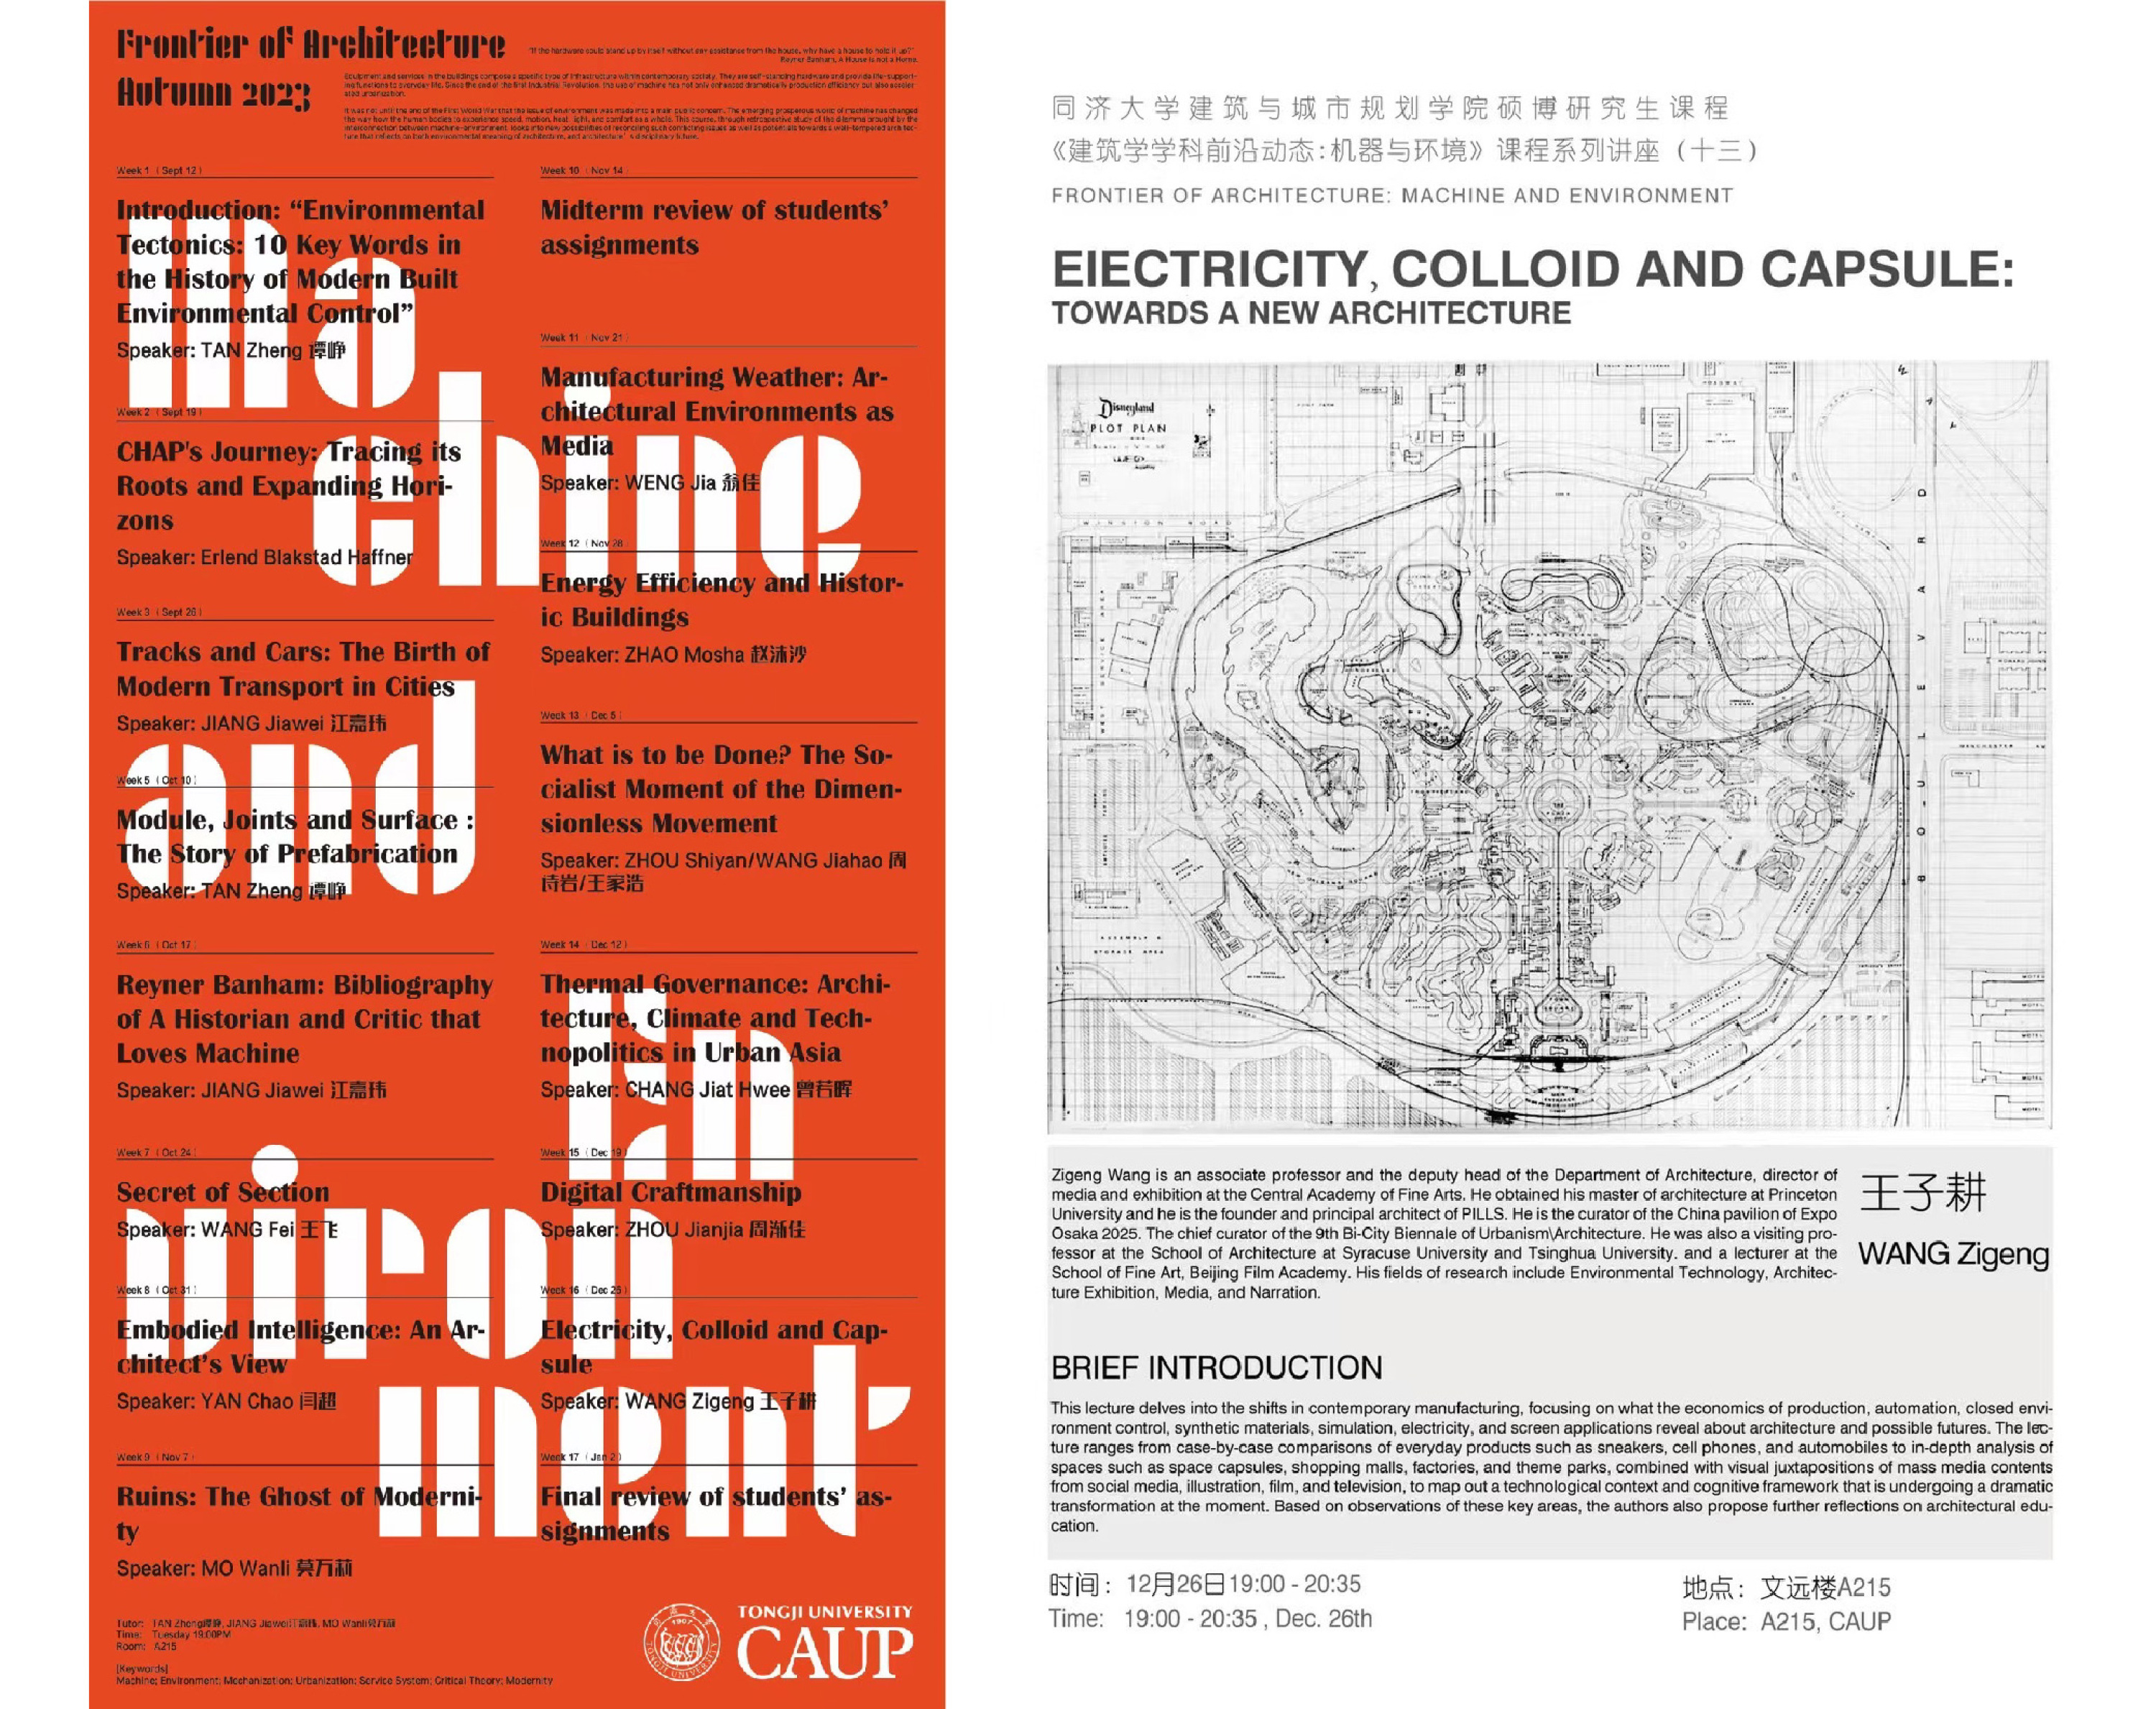 Zigeng Wang was Invited to Share a Lecture on “Electricity, Colloid and Capsule" in the Frontier of Architecture Course Series at Tongji University